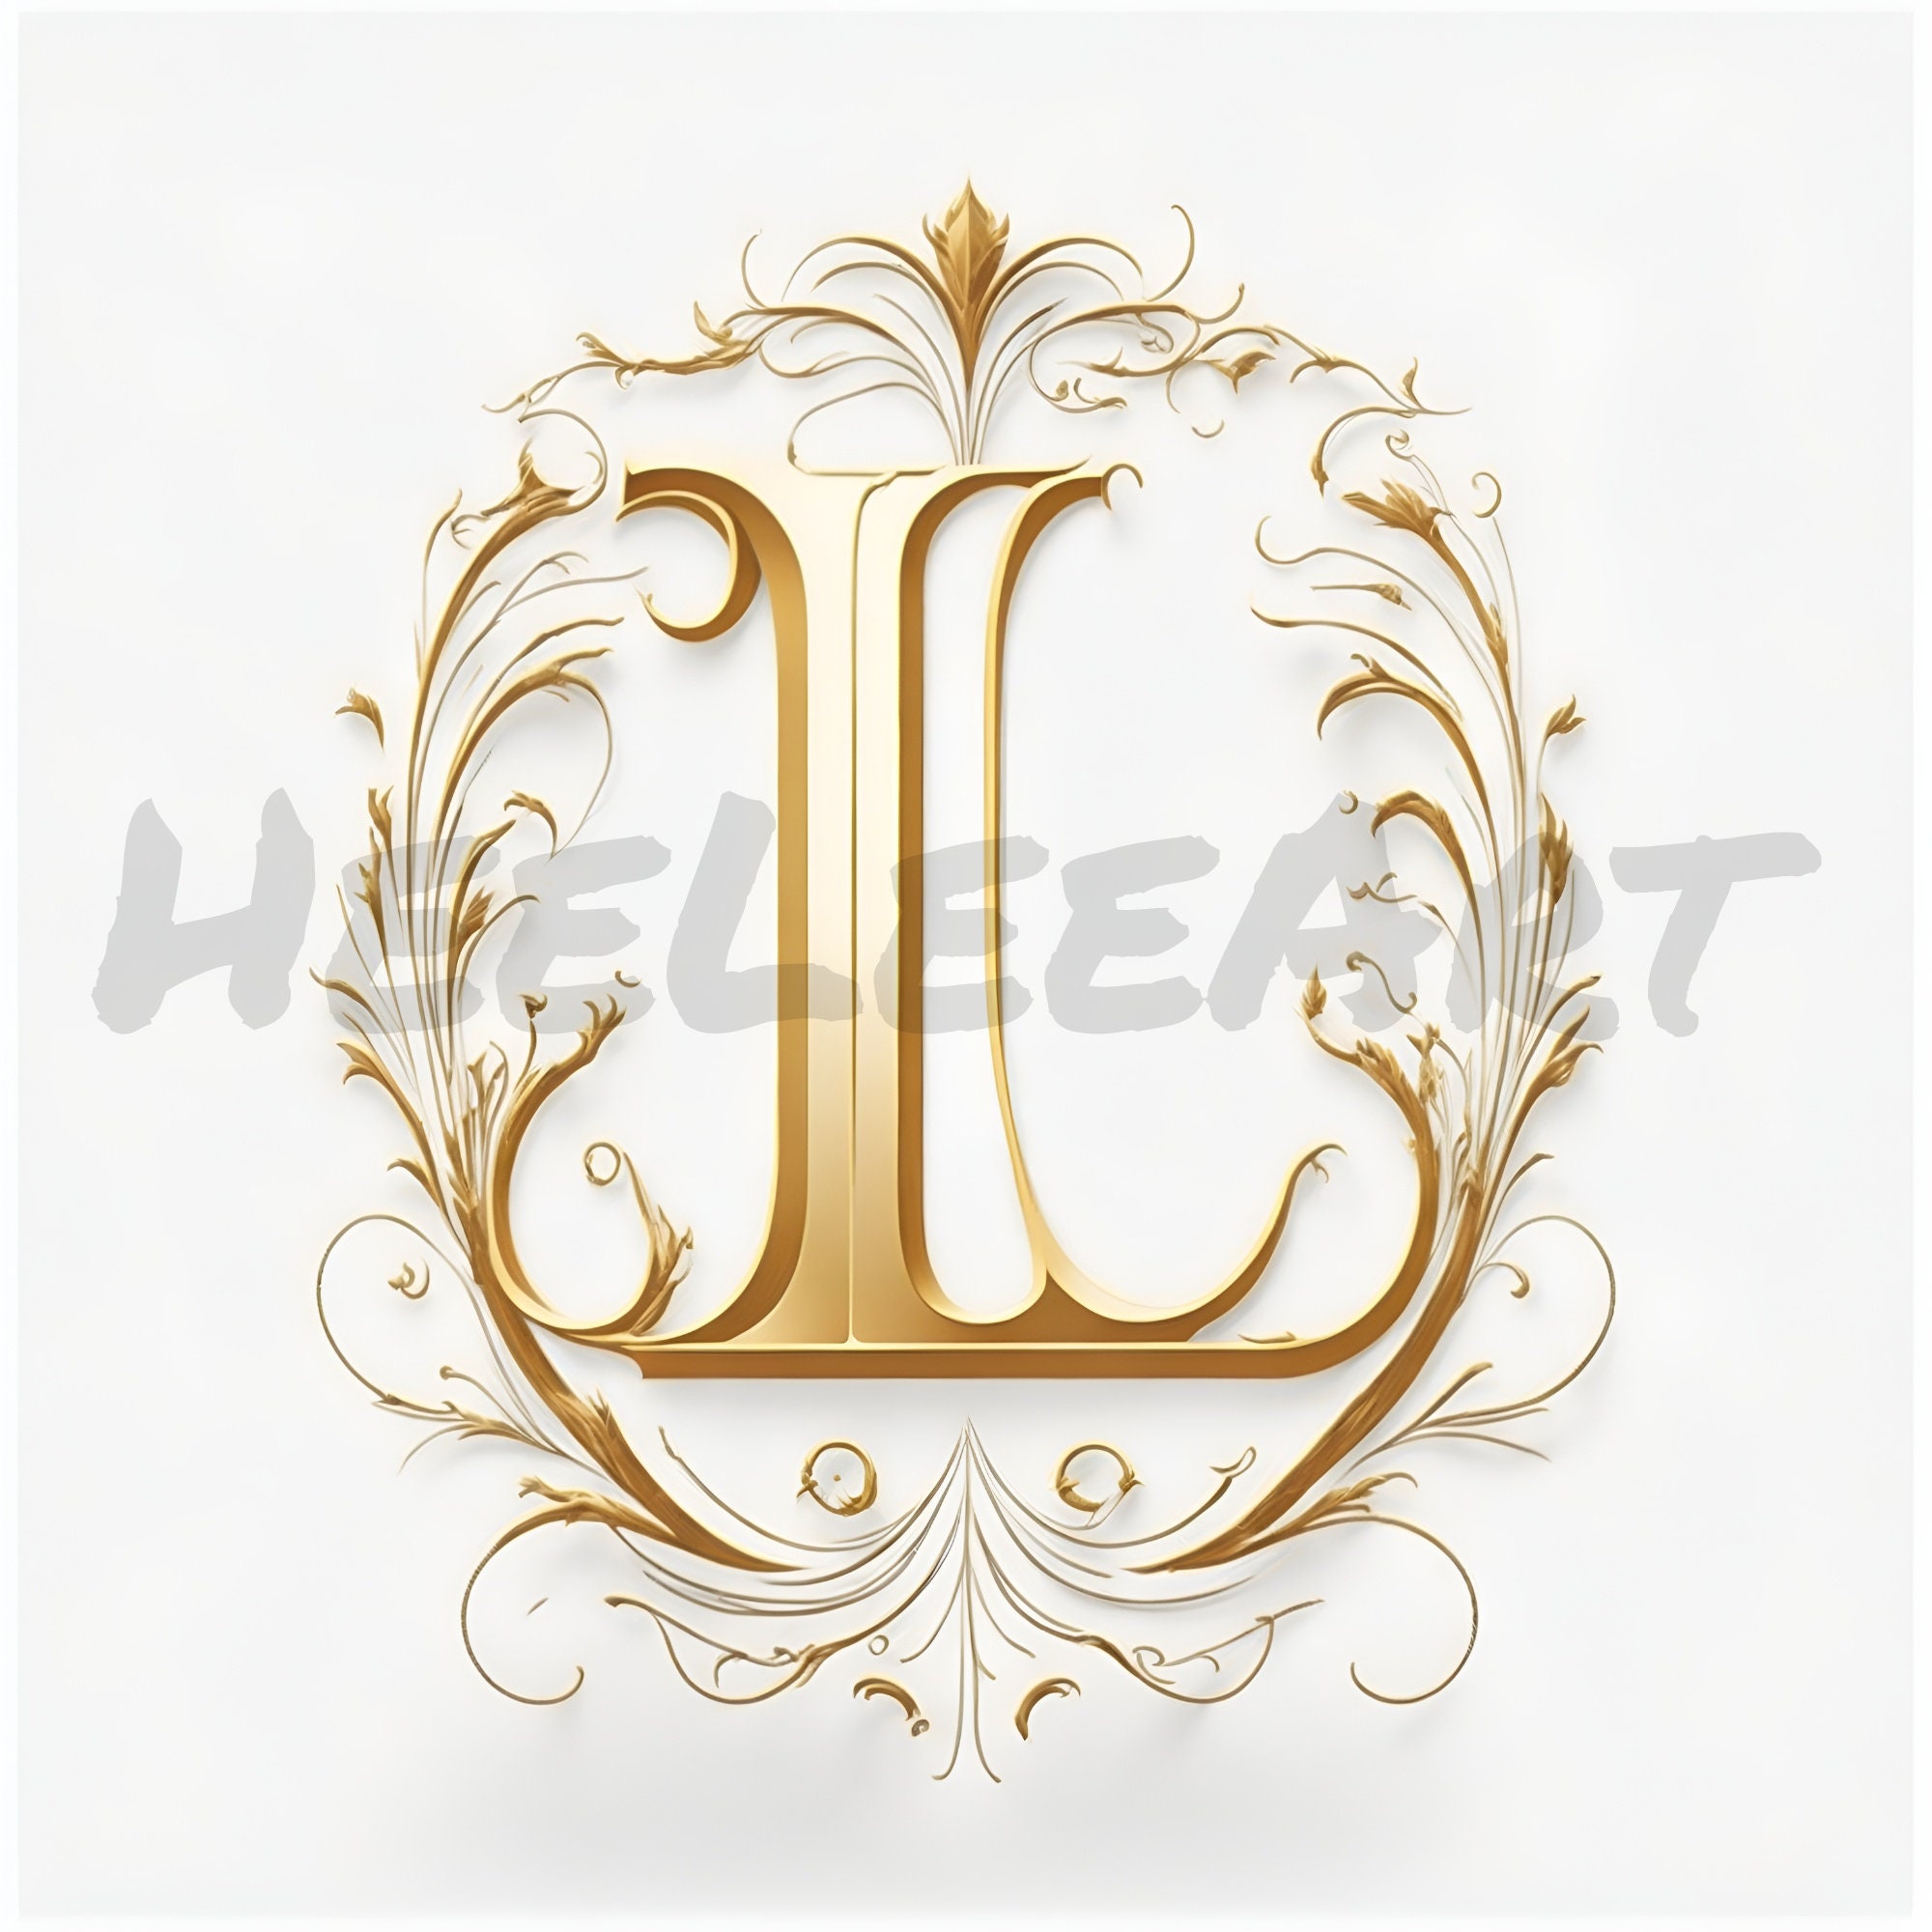 Digital Download Letter P Crown on Whitish Background Alphabet Initials  Monogram AI Generated Art Print Printable Image Stock Photo PNG -   Sweden